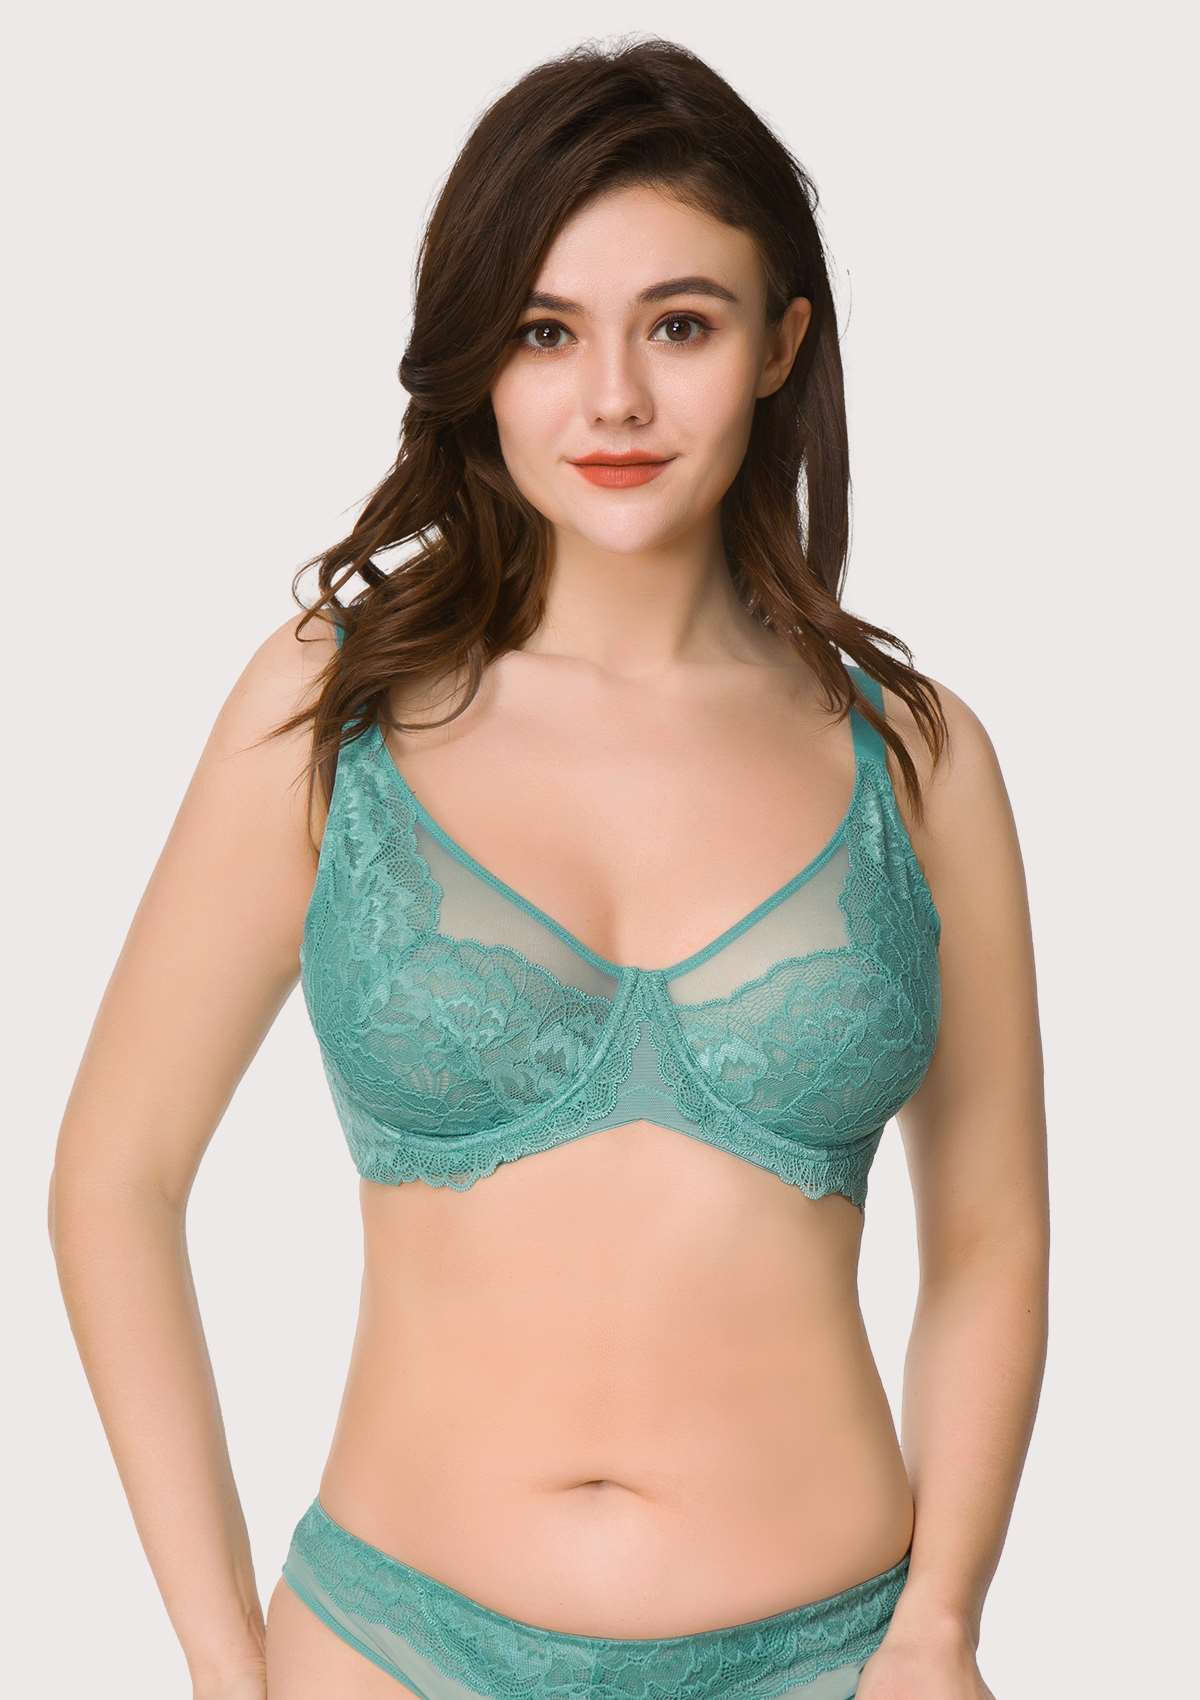 HSIA Peony Lace Unlined Supportive Underwire Bra - Light Coral / 38 / C